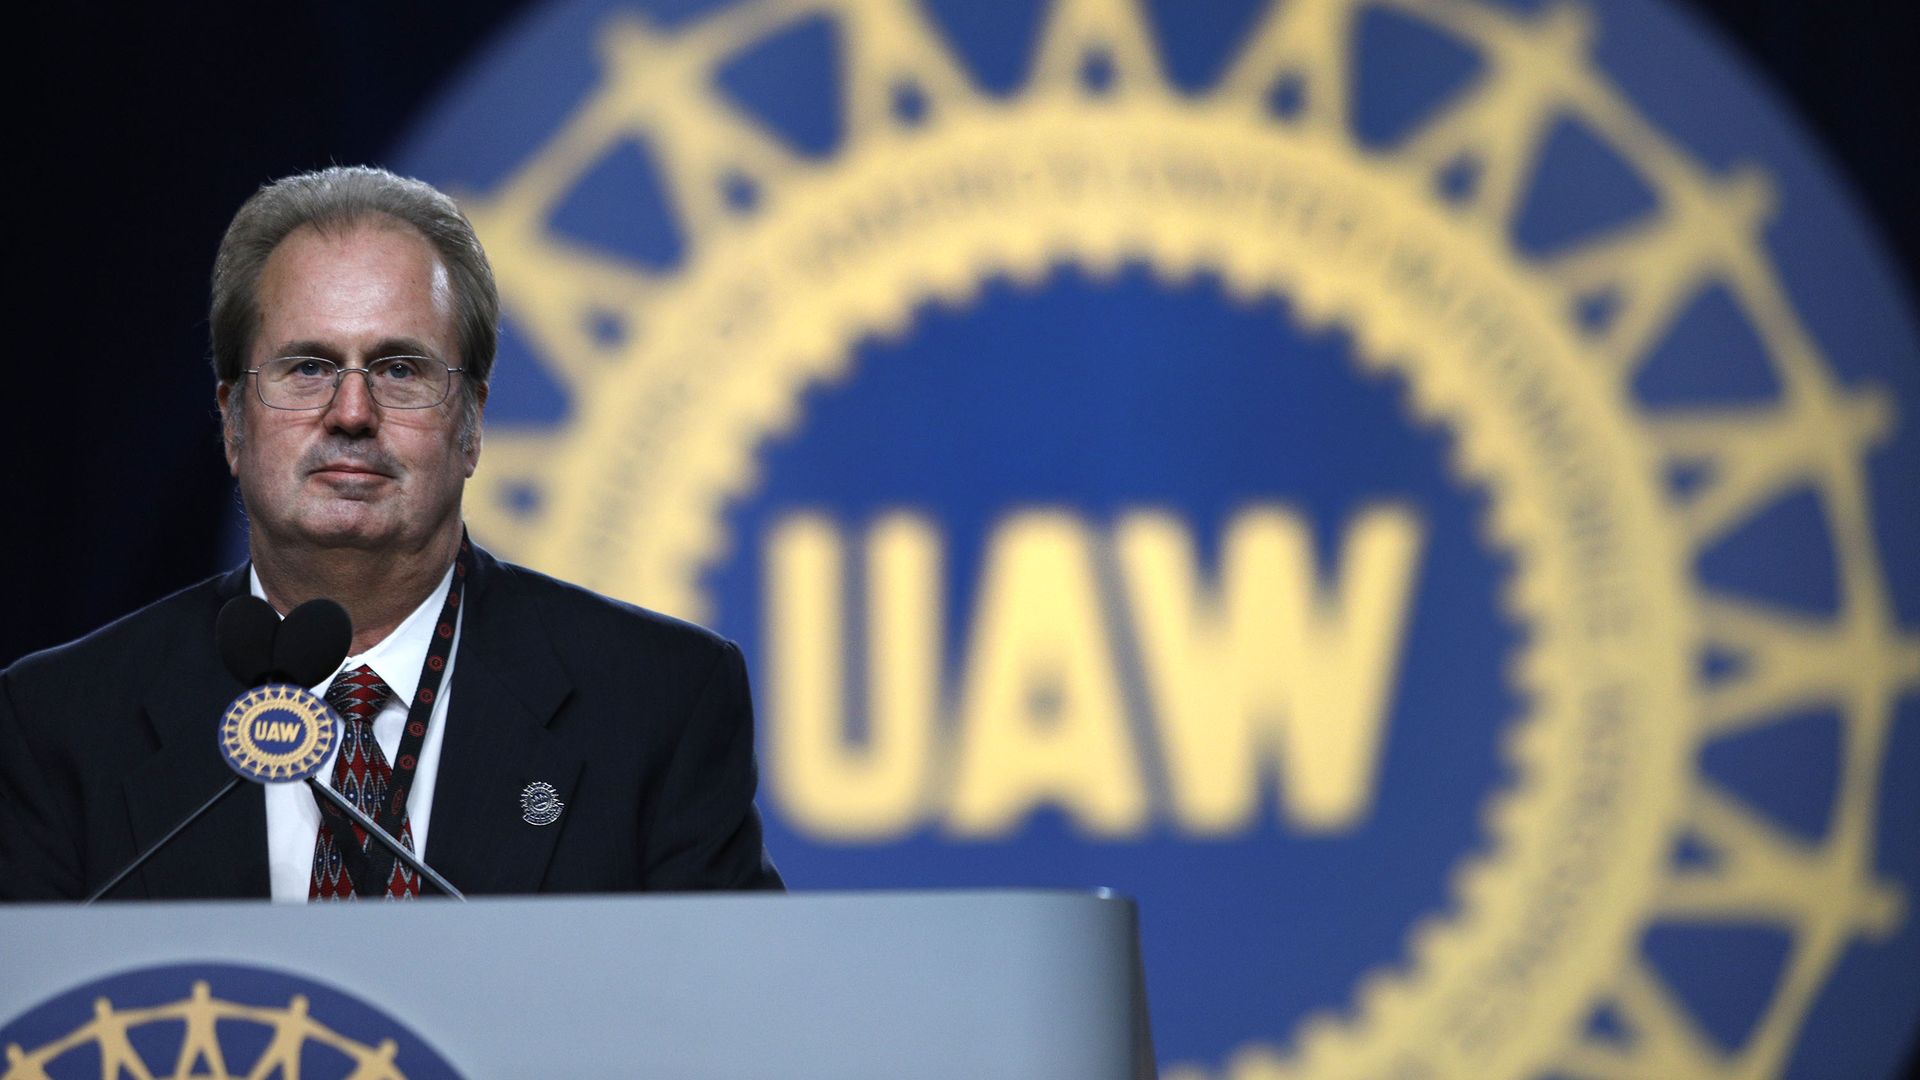 Gary Jones, then the newly-elected president of the United Auto Workers (UAW), speaking in Detroit in June 2018.